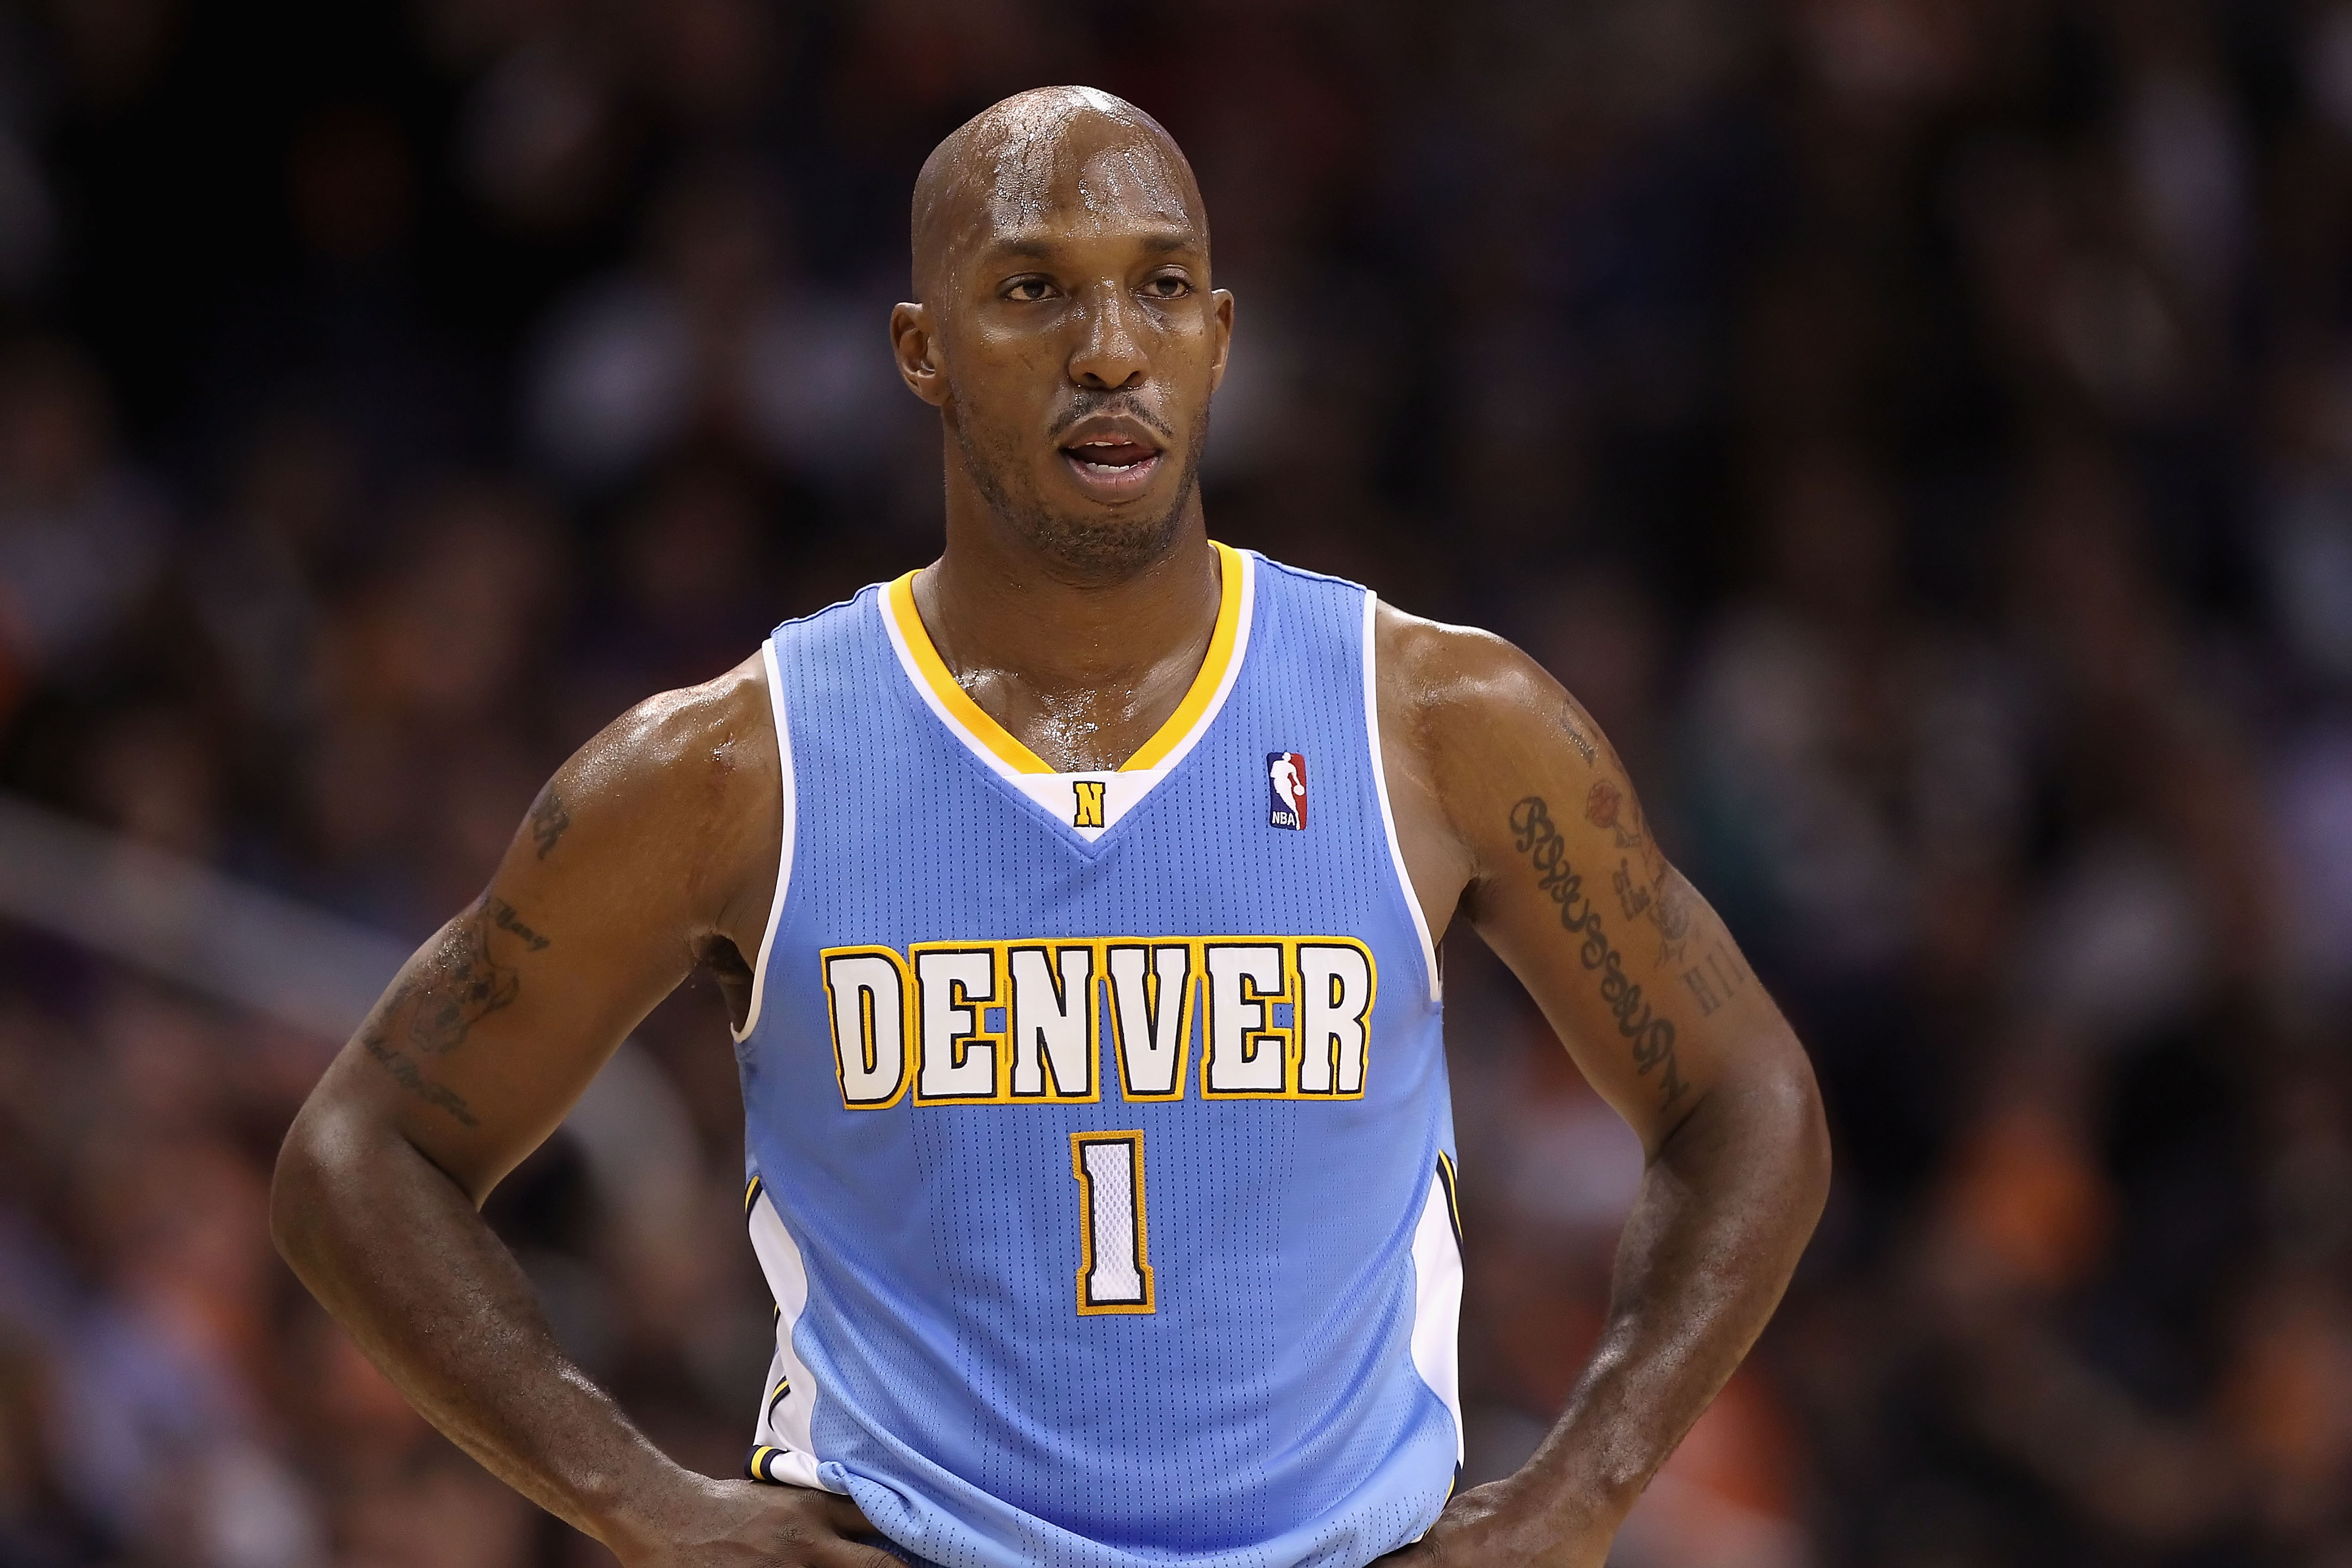 PHOENIX - NOVEMBER 15:  Chauncey Billups #1 of the Denver Nuggets during the NBA game against the Phoenix Suns at US Airways Center on November 15, 2010 in Phoenix, Arizona.  The Suns defeated the Nuggets 100-94.  NOTE TO USER: User expressly acknowledges